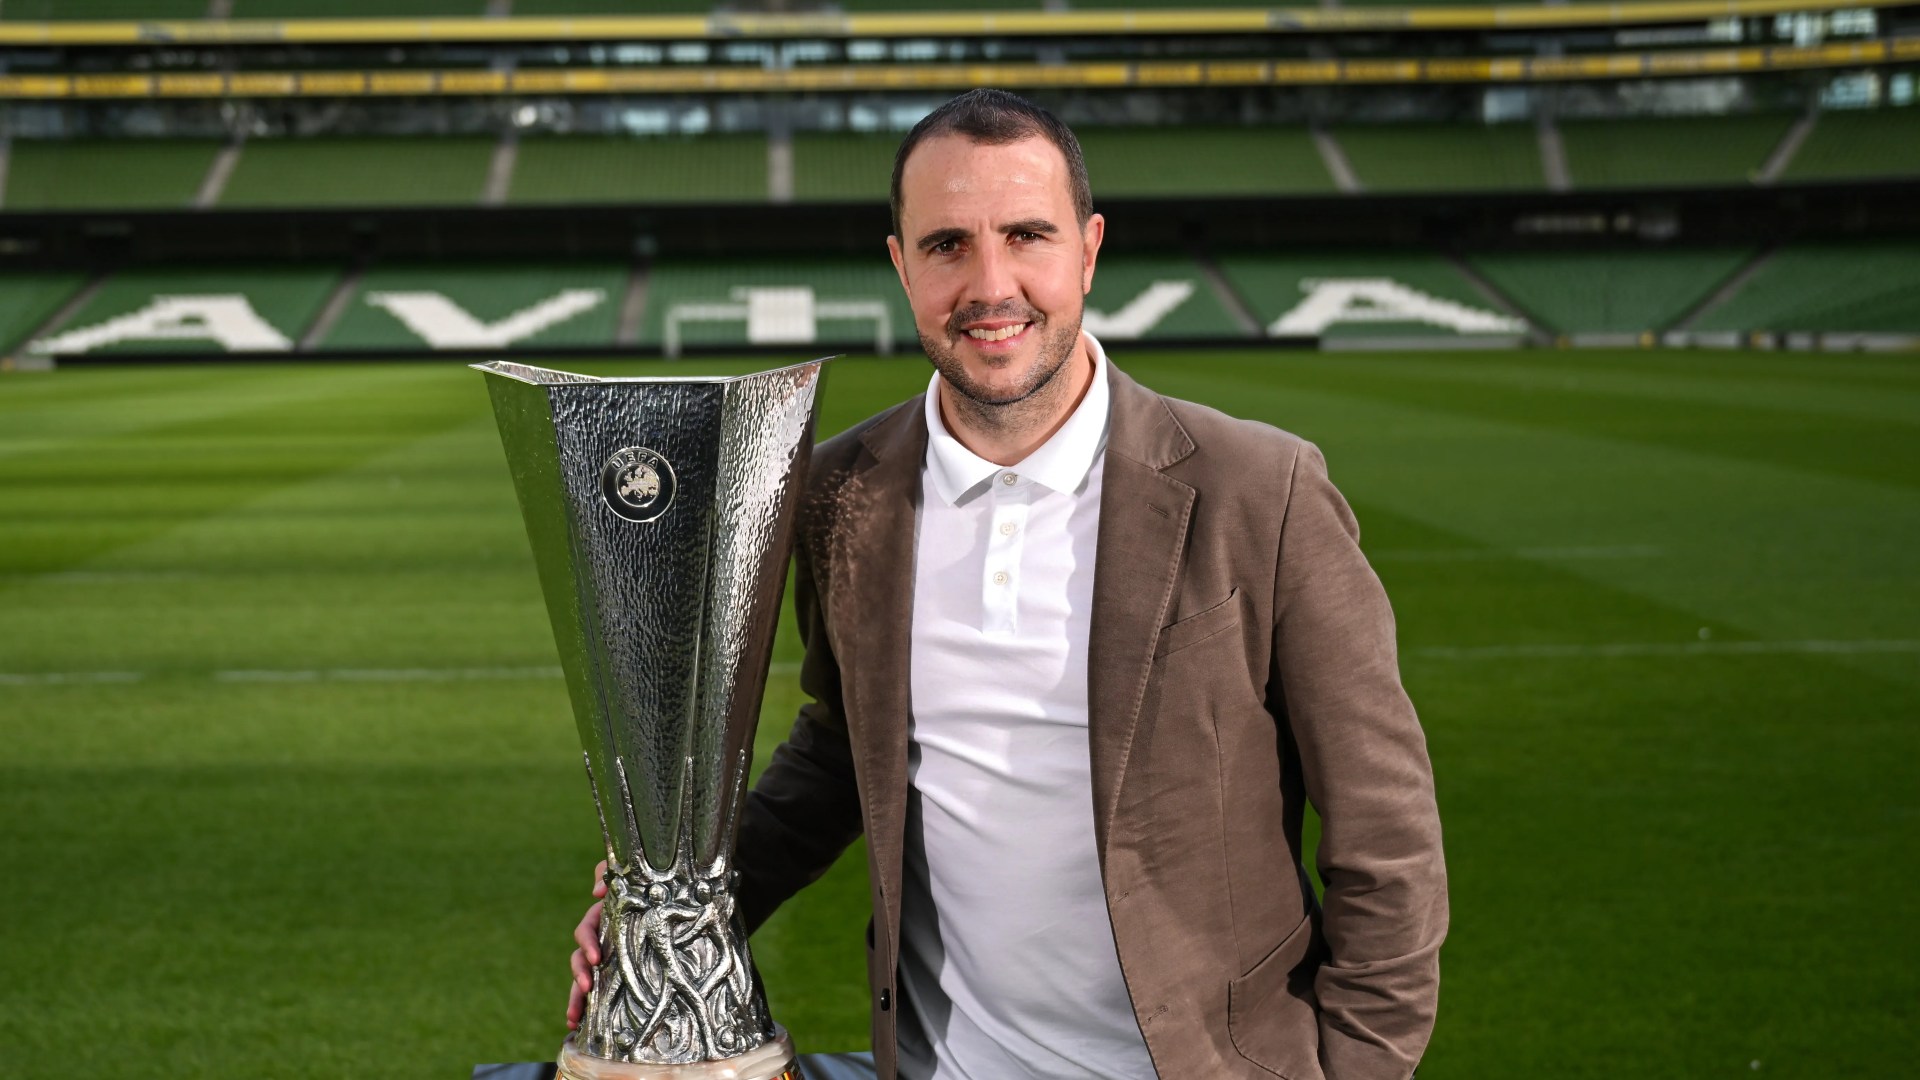 John O'Shea reveals why Mick McCarthy was at Republic of Ireland team hotel during recent international fixtures